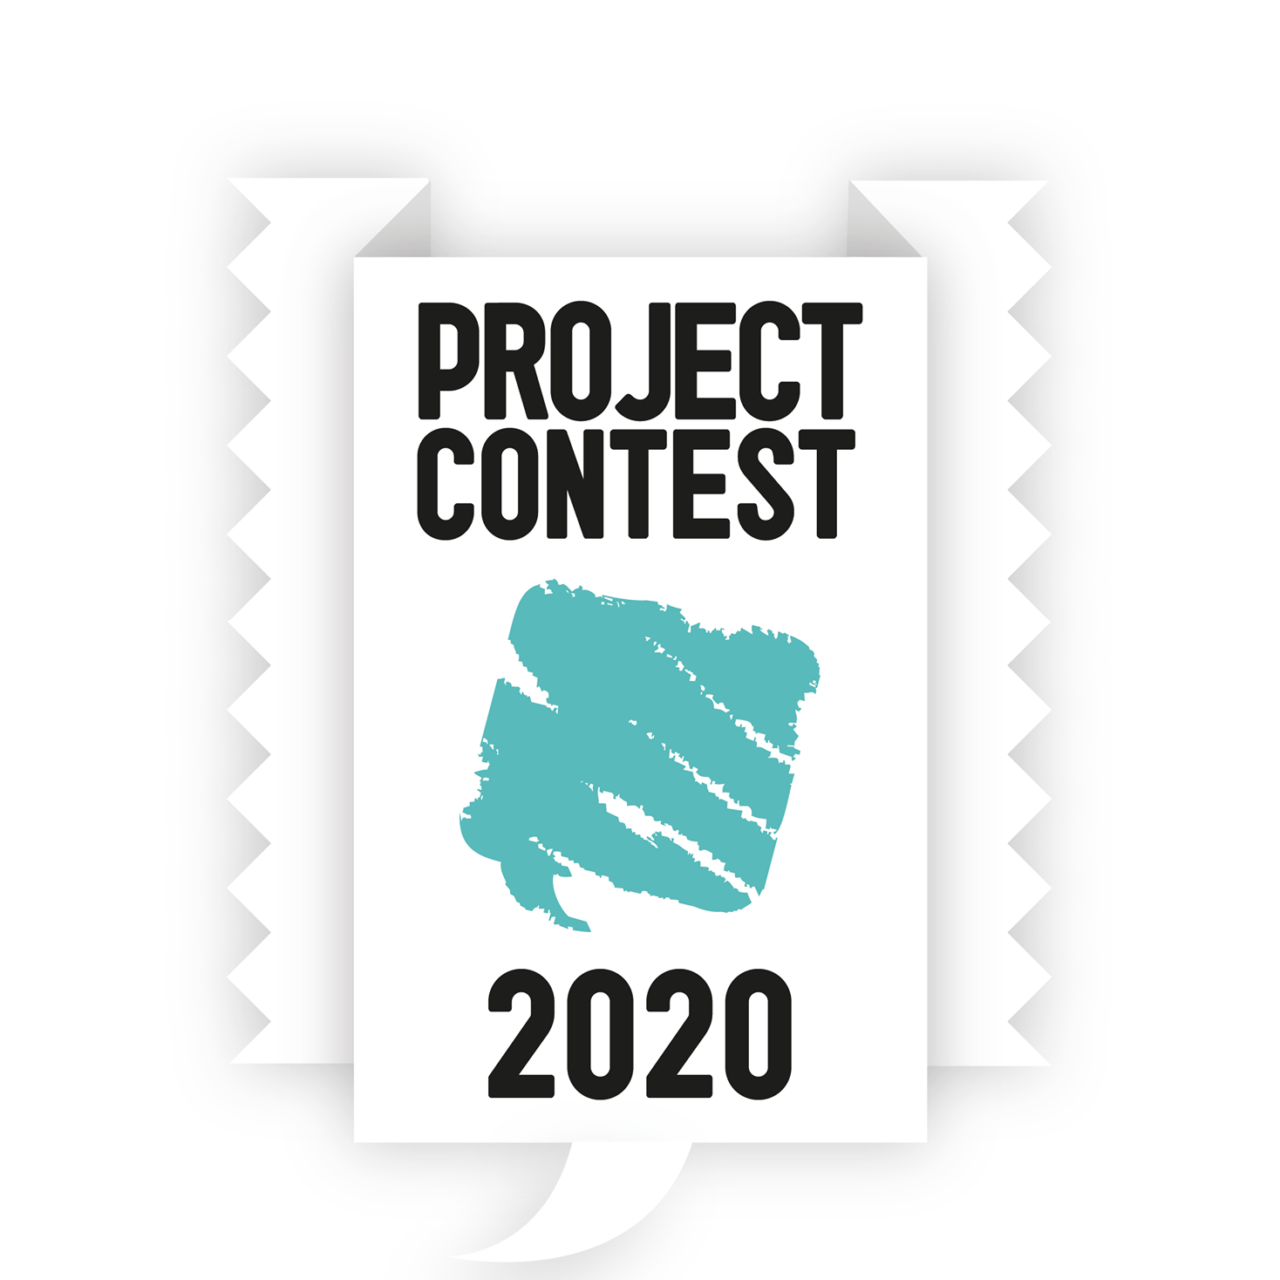 Lucca Project Contest 2021